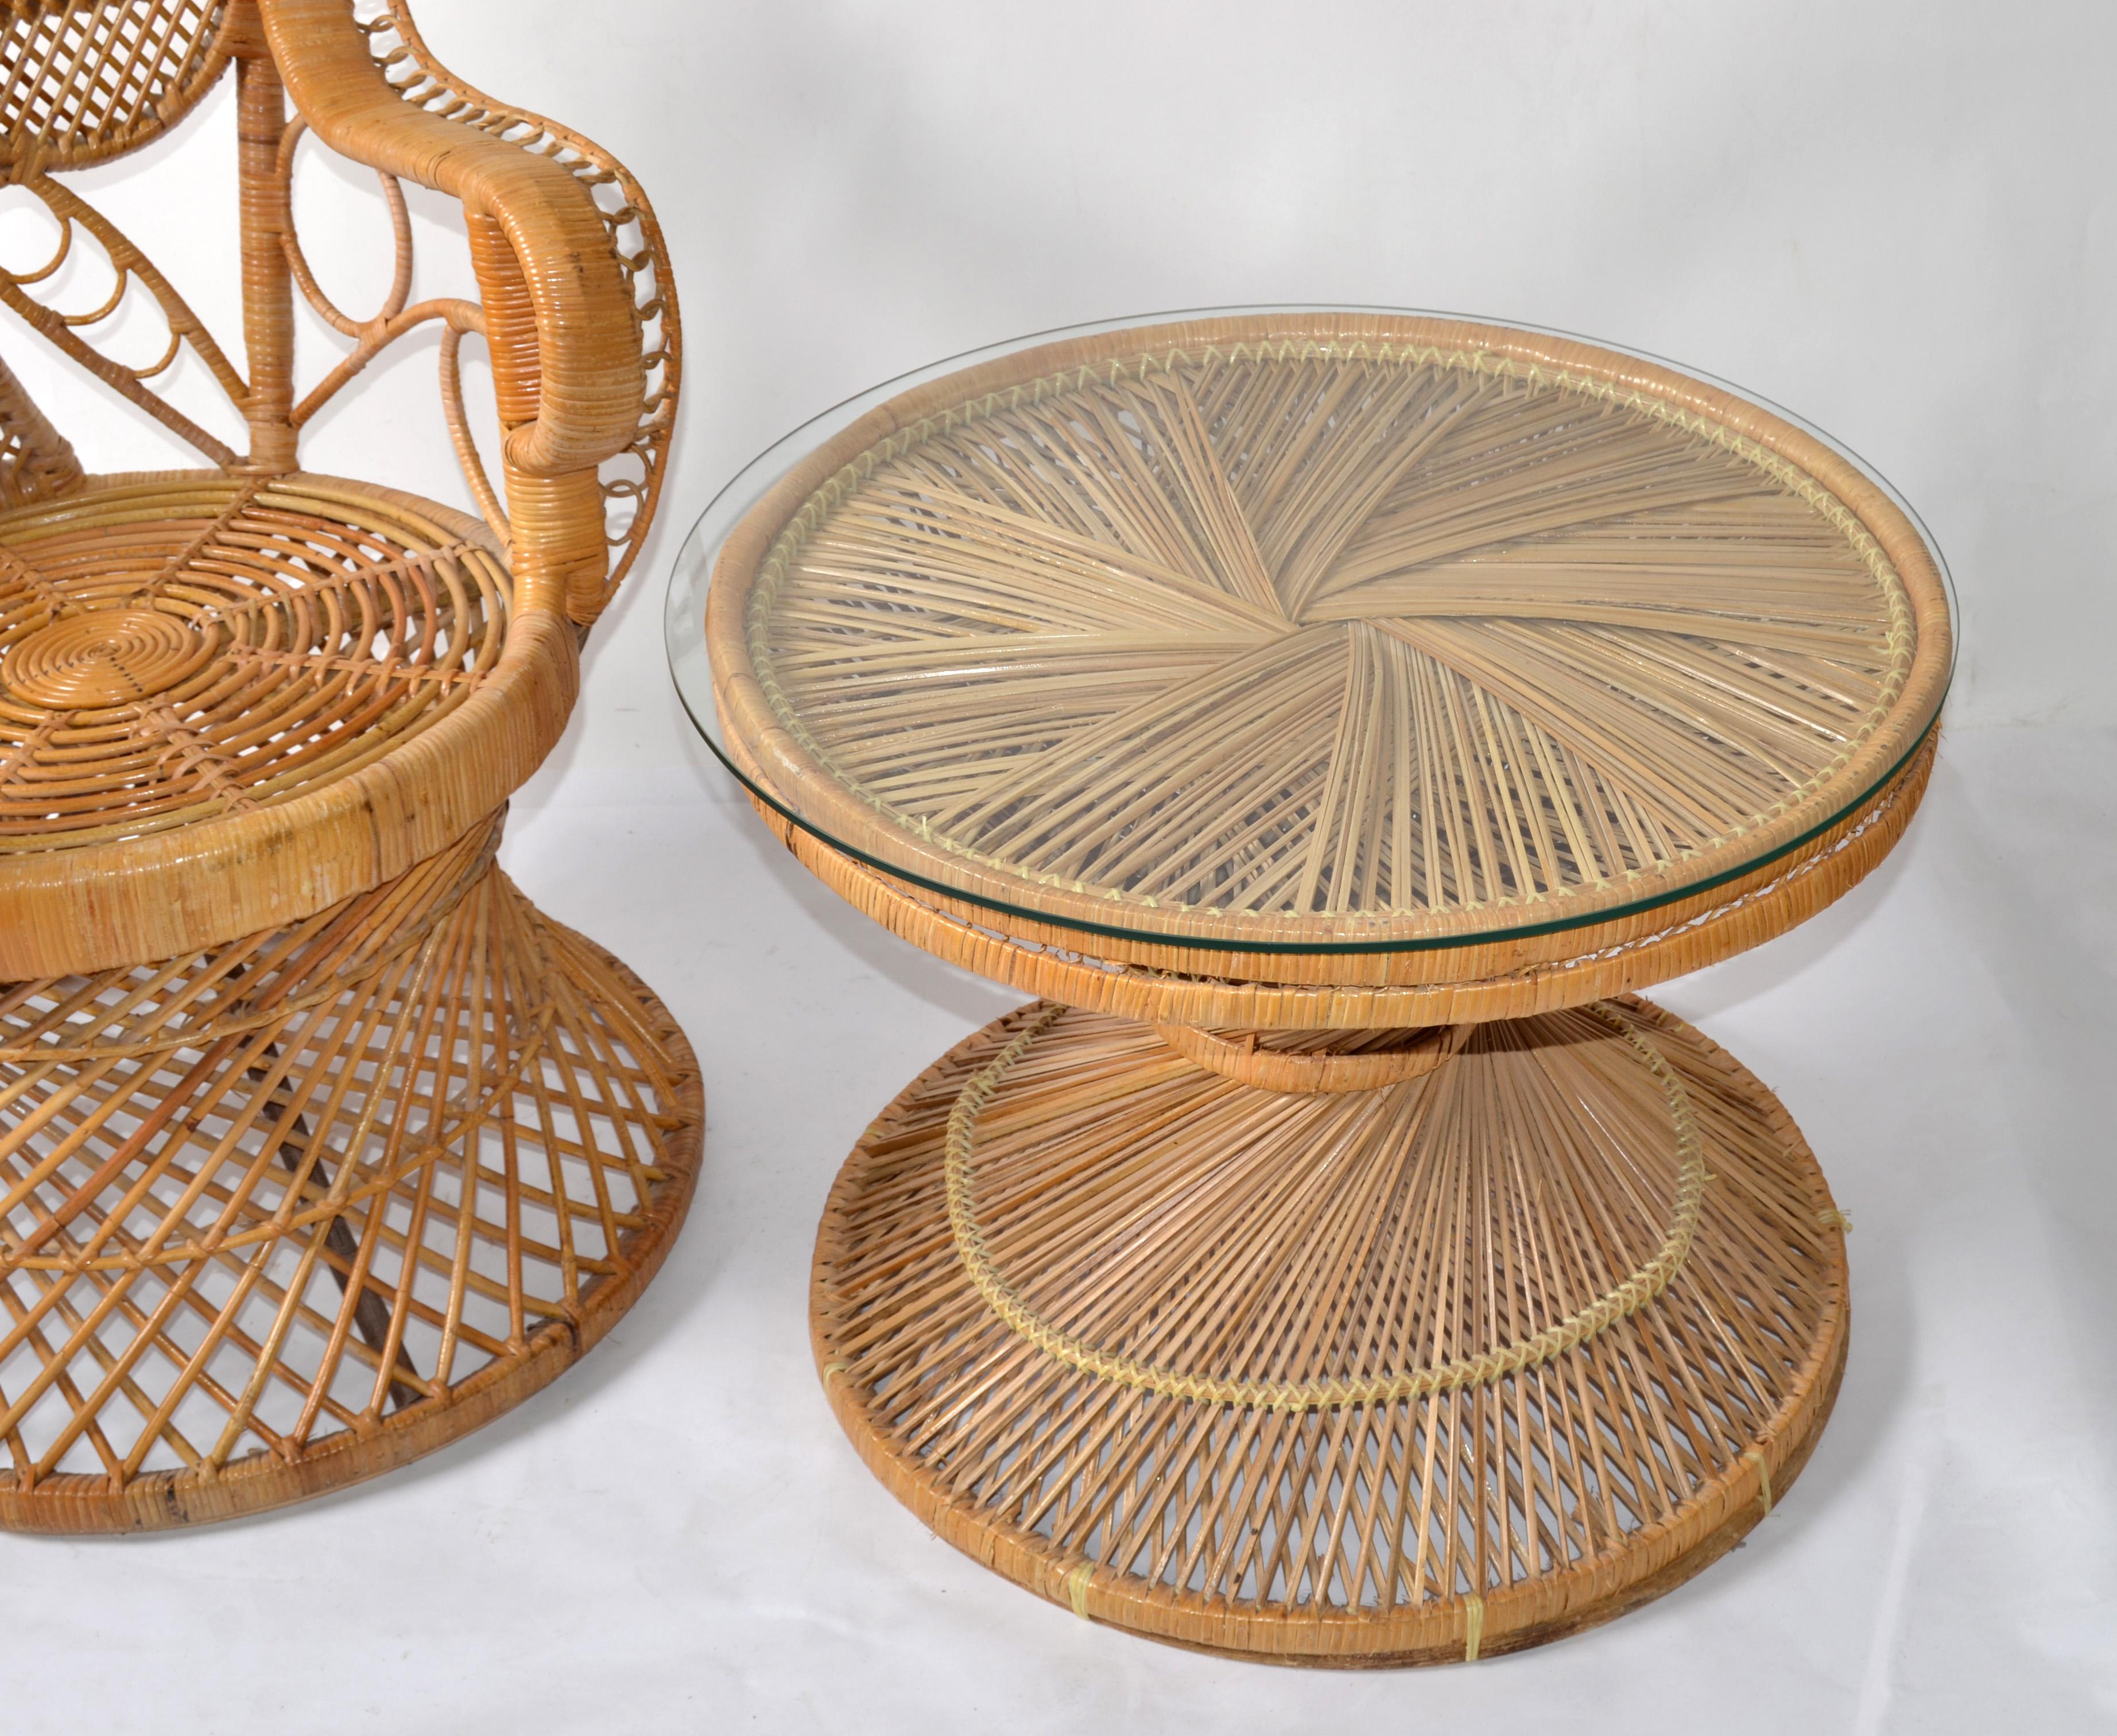 Osier Coastal Vintage Round Rattan Accent Table Hand-Woven Wicker Caning Peacock Chair en vente